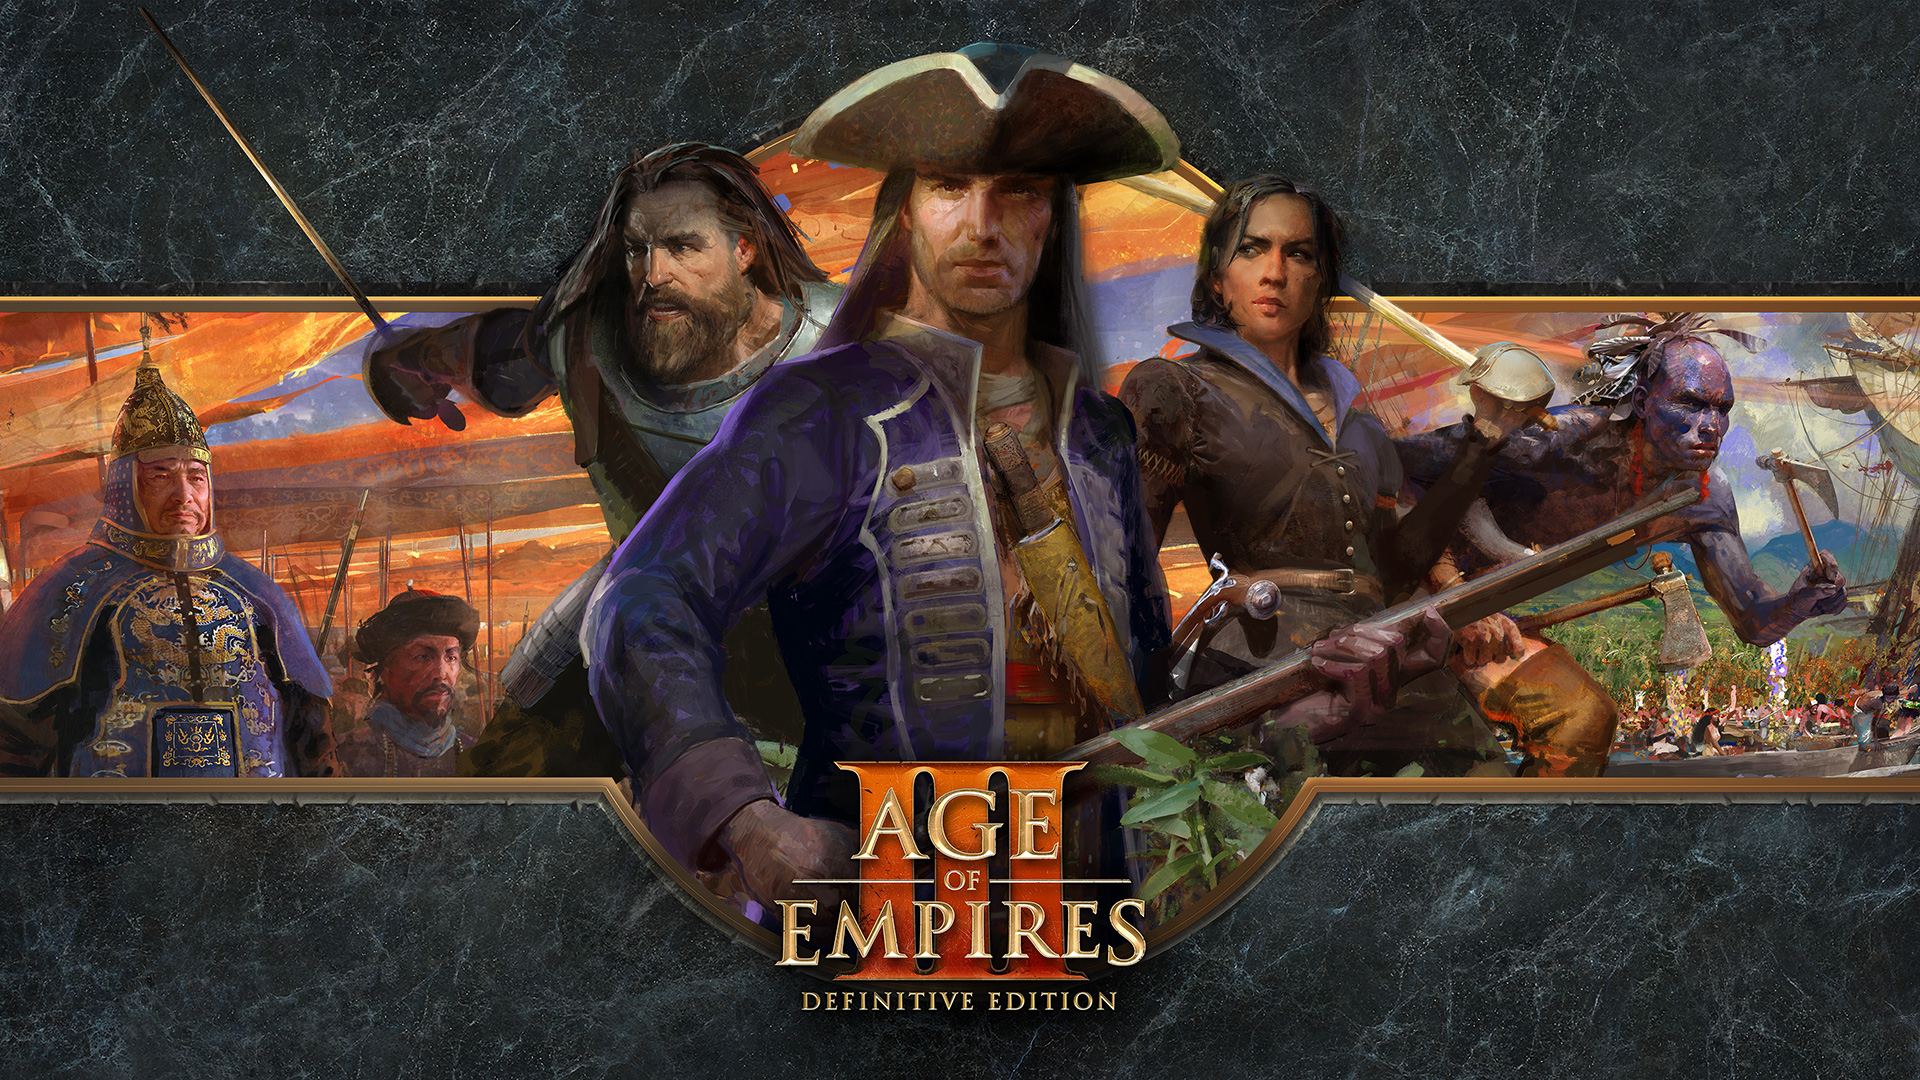 download age of empires 3 full version and enter seperate product key